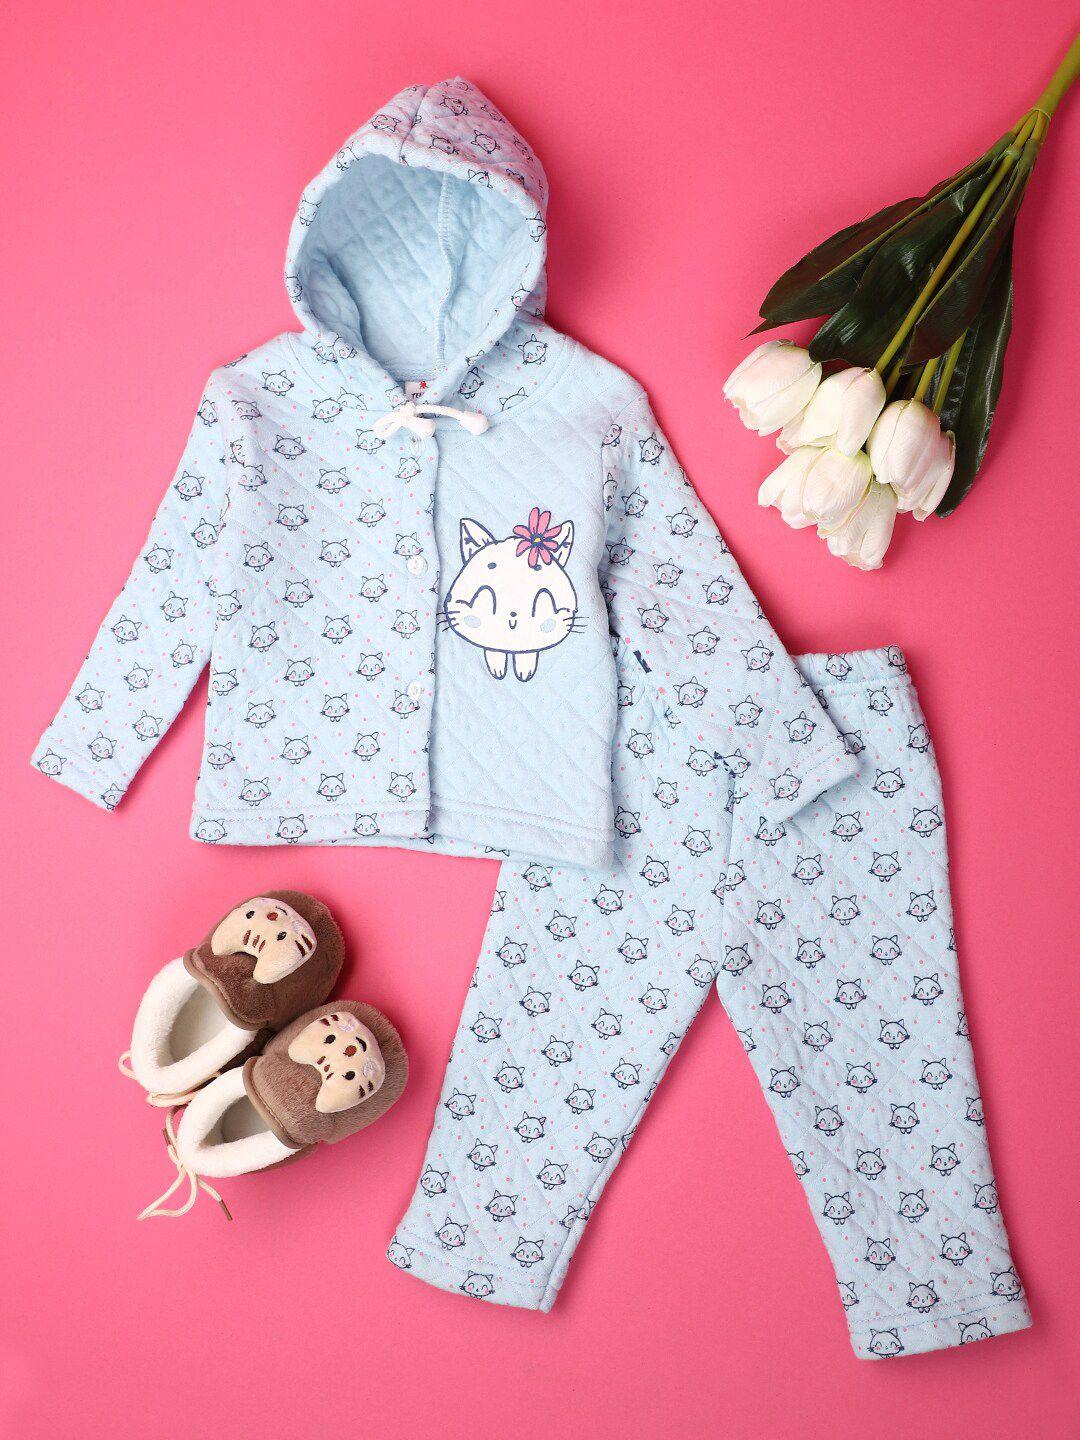 v-mart-infants-conversational-printed-hooded-pure-cotton-sweatshirt-and-trouser